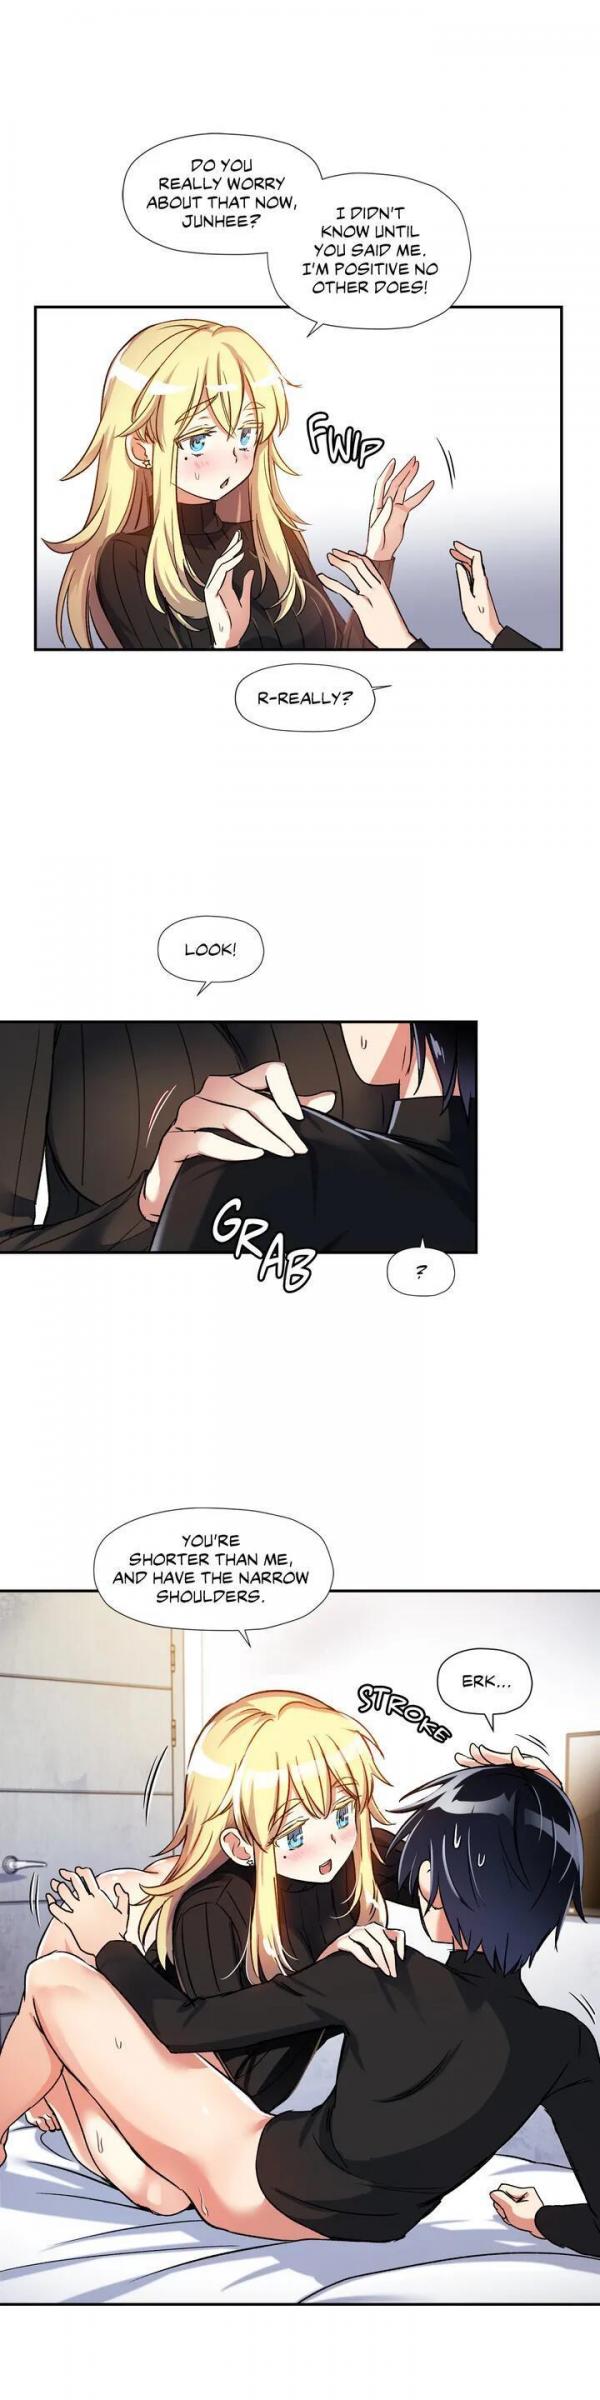 What Do I Do Now Manhwa Under Observation: My First Loves And I - photo #11914392 - Mangago